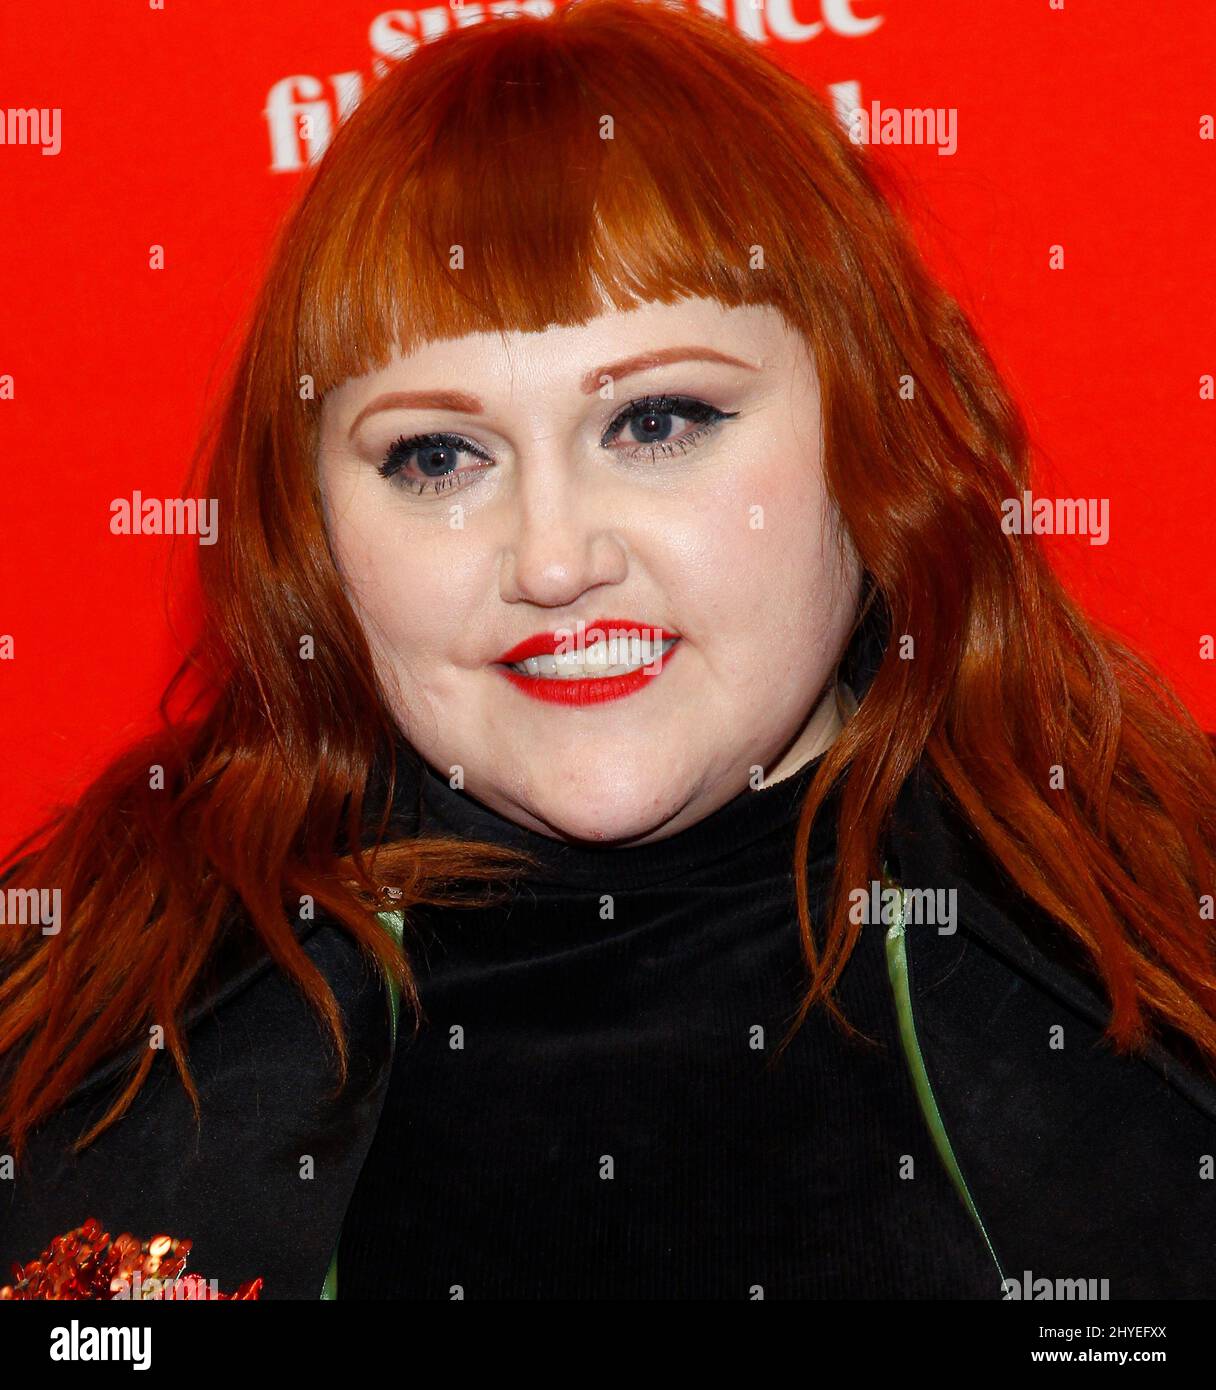 Beth Ditto at the premiere of 'Don't Worry, He Won't Get Far On Foot' during the 2018 Sundance Film Festival held at the Eccles Center Theatre on January 19, 2018 in Park City, UT Stock Photo